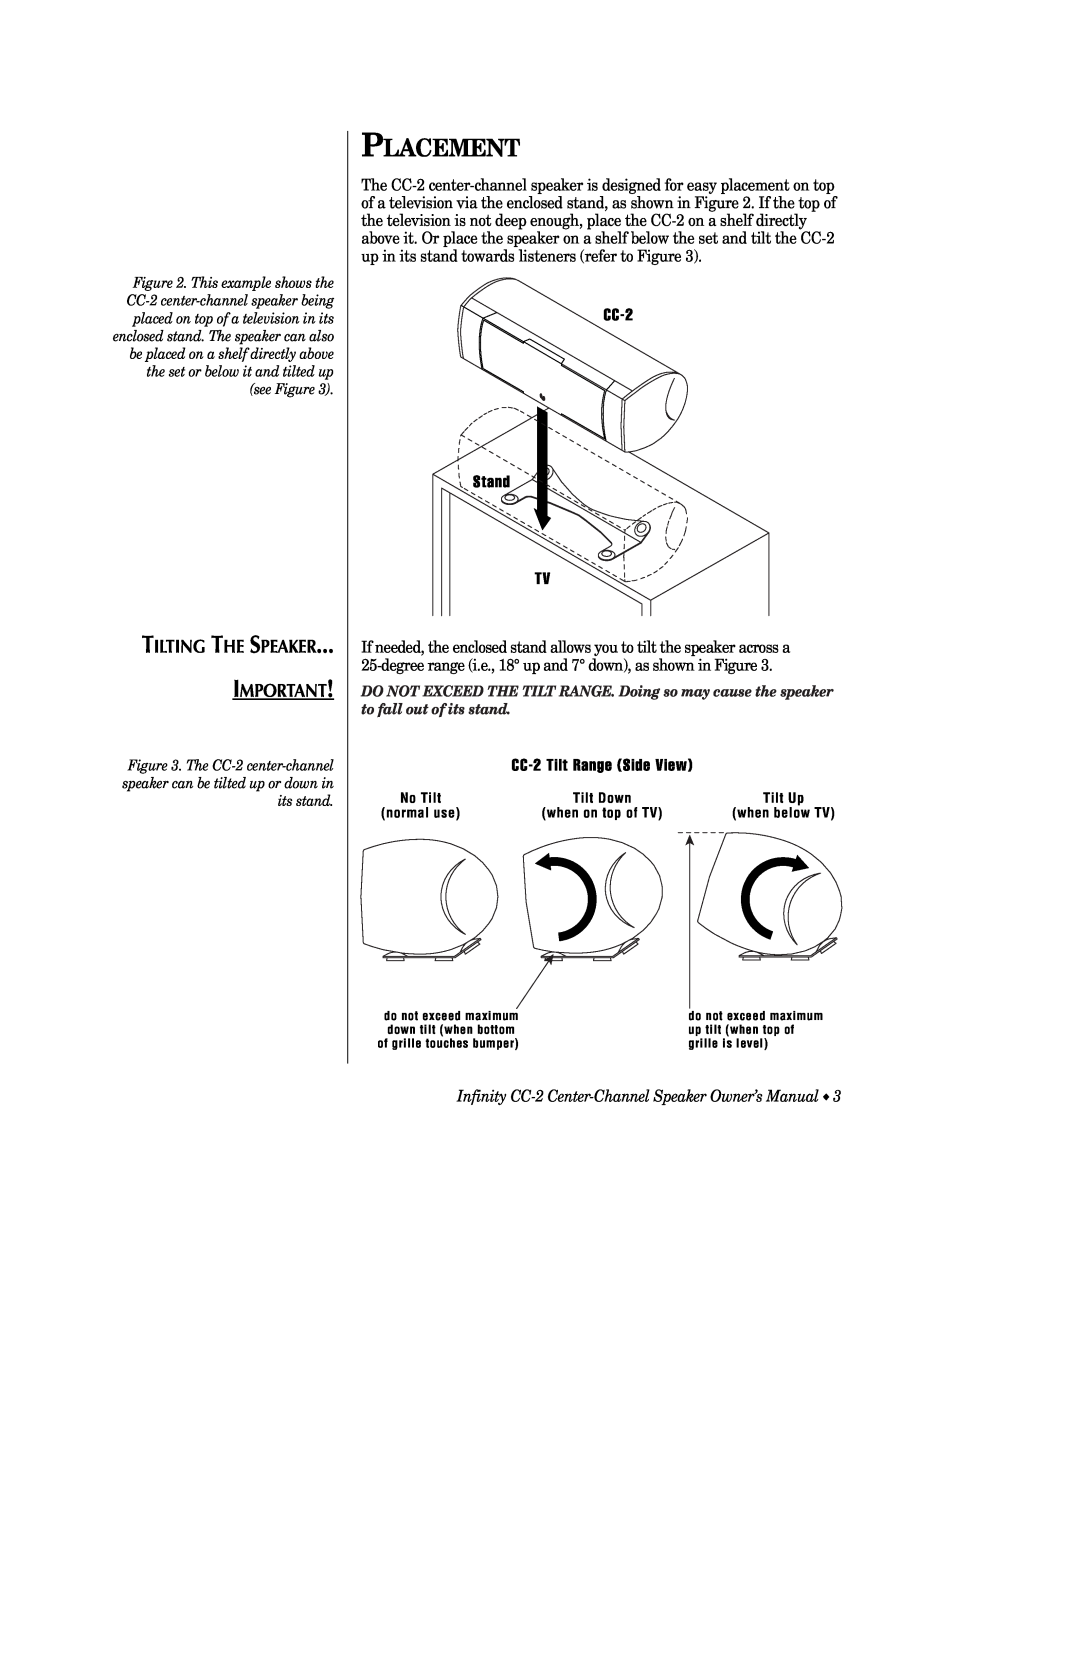 Infinity CC-2 owner manual Placement, Tilting The Speaker 